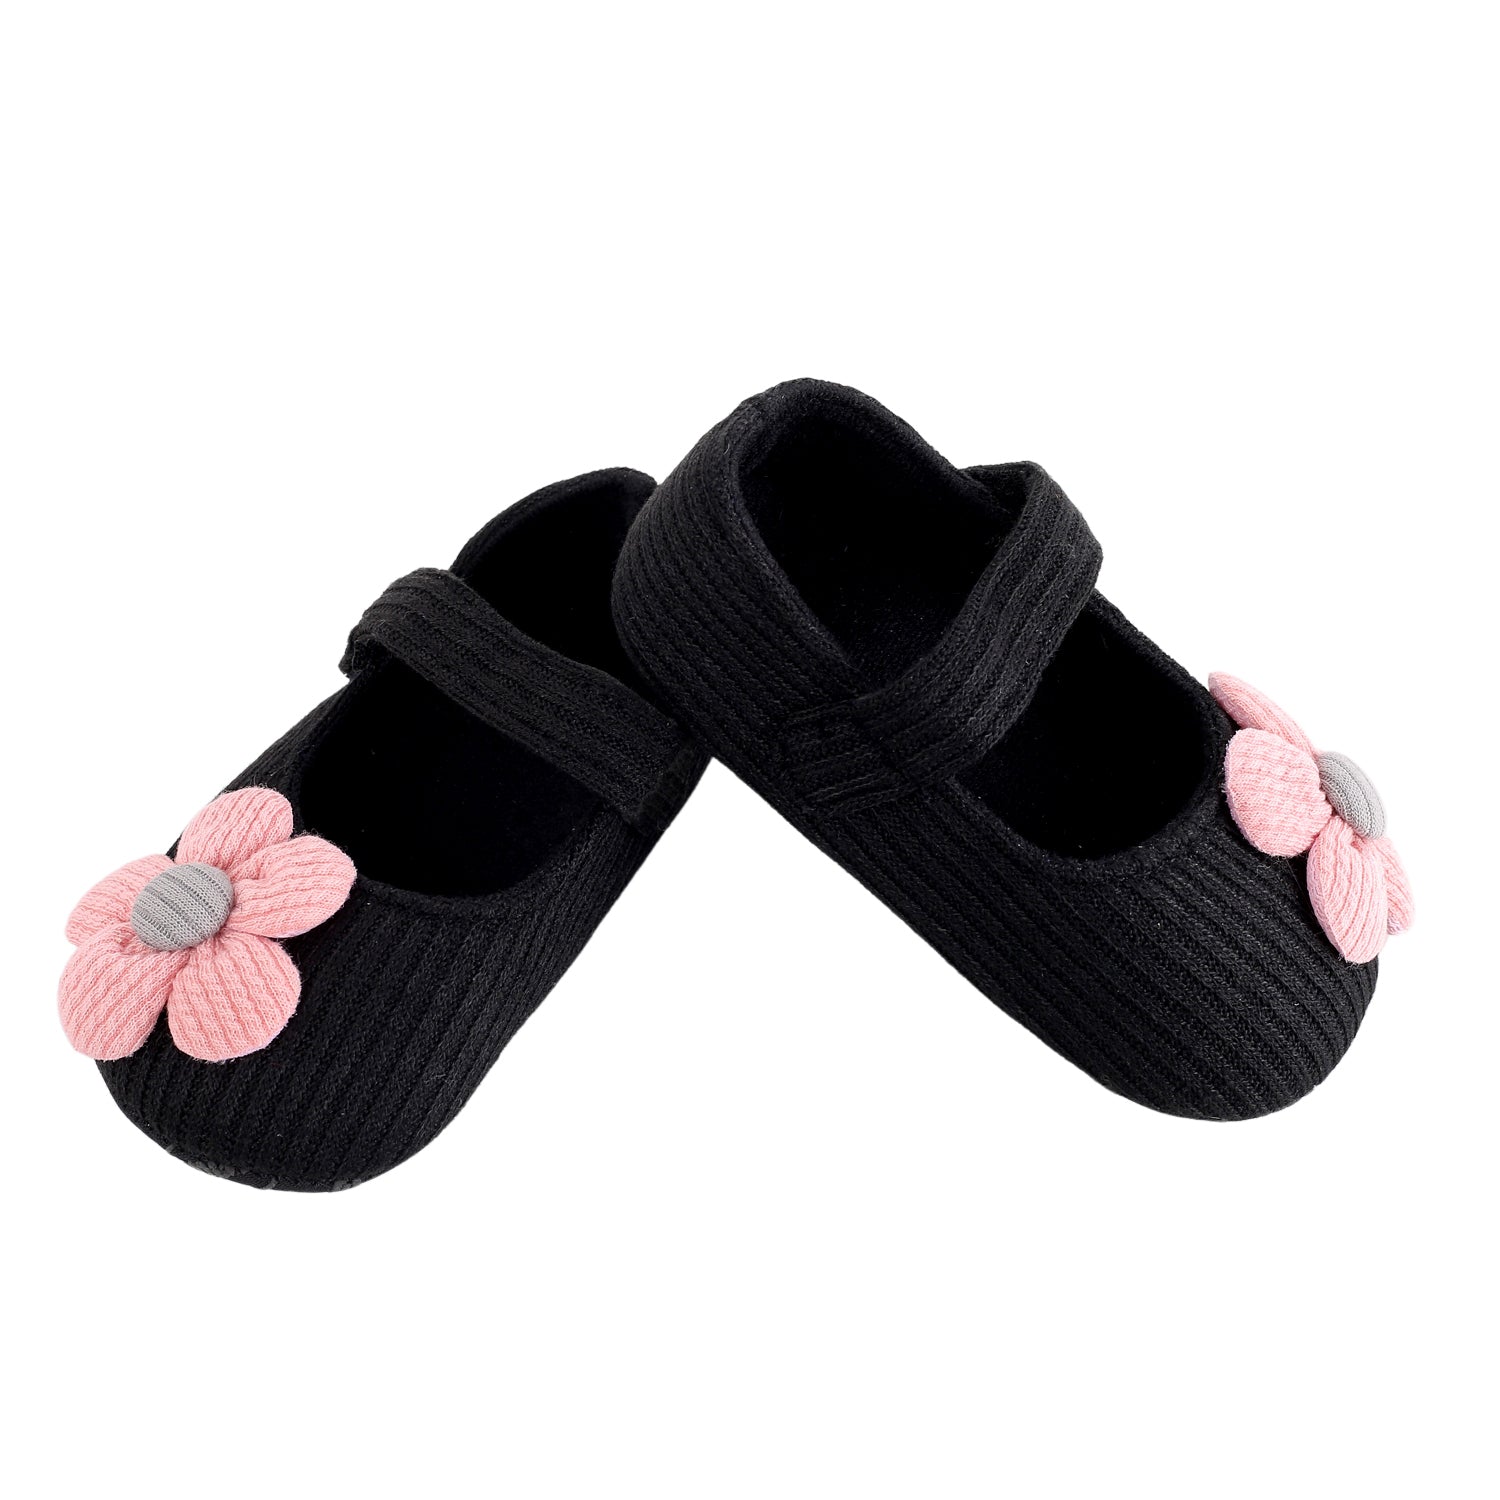 Baby Moo Floral Applique Black And Pink Booties - Baby Moo